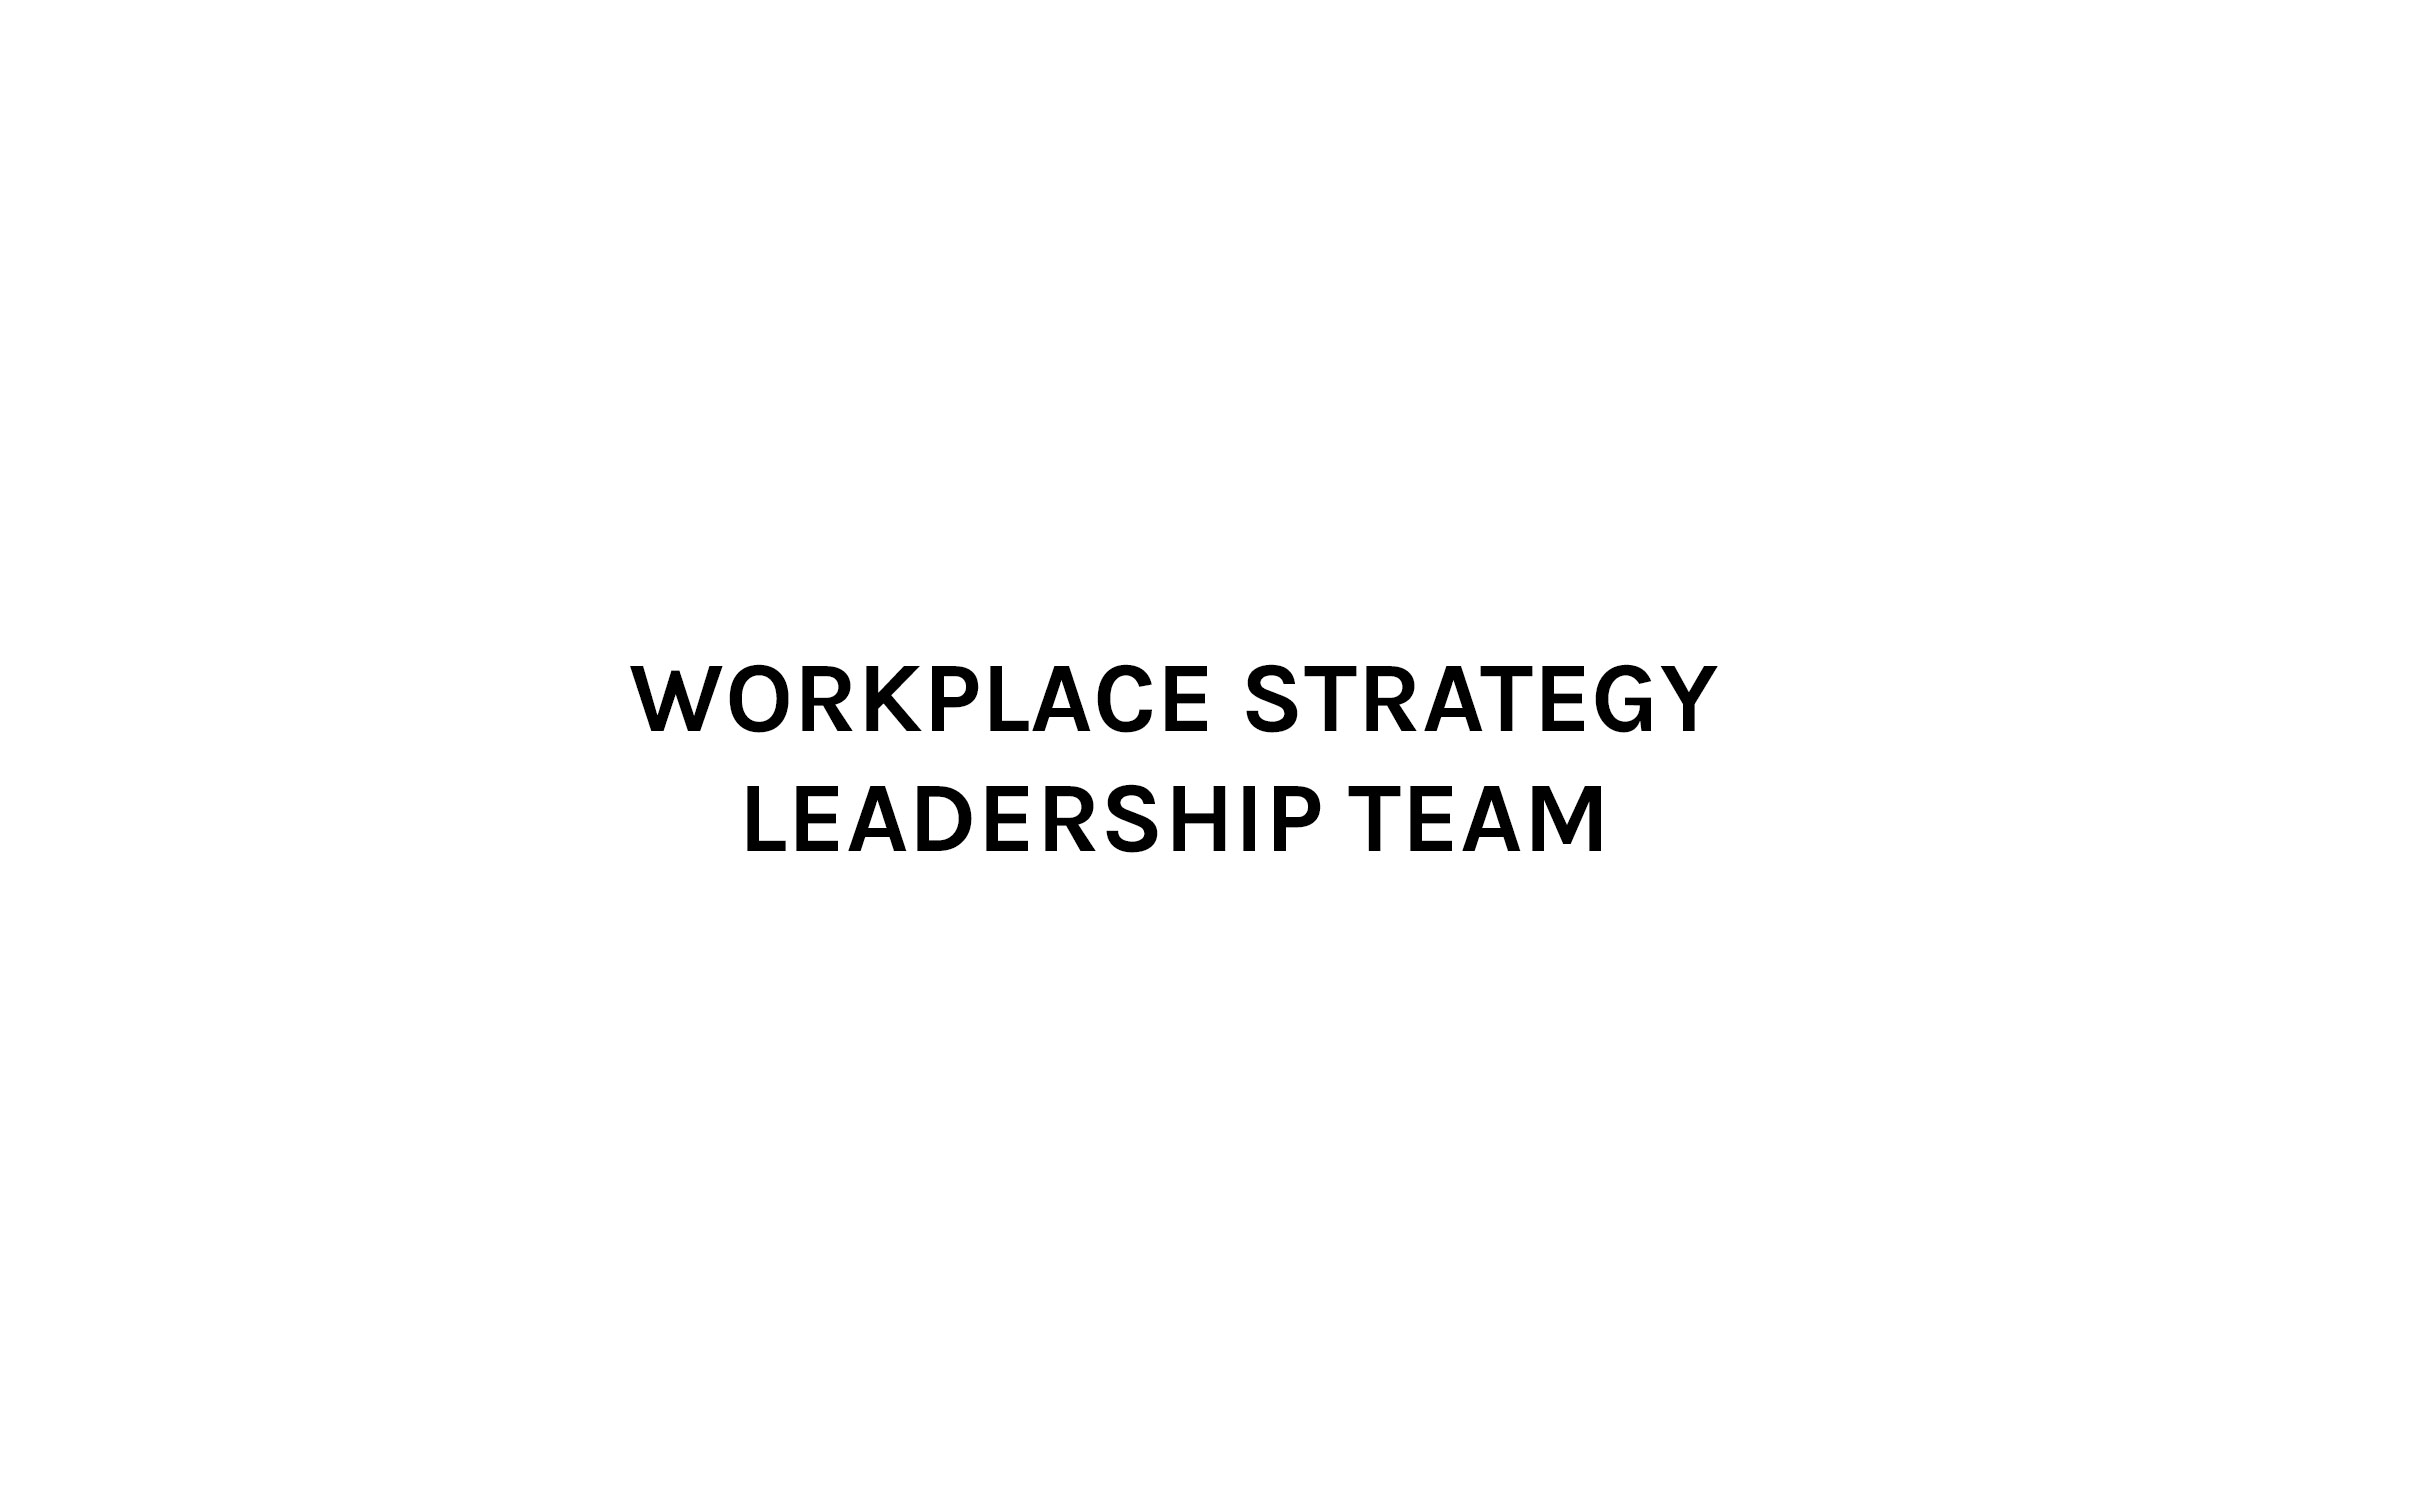 Workplace Strategy Team SmithGroup Leadership Team